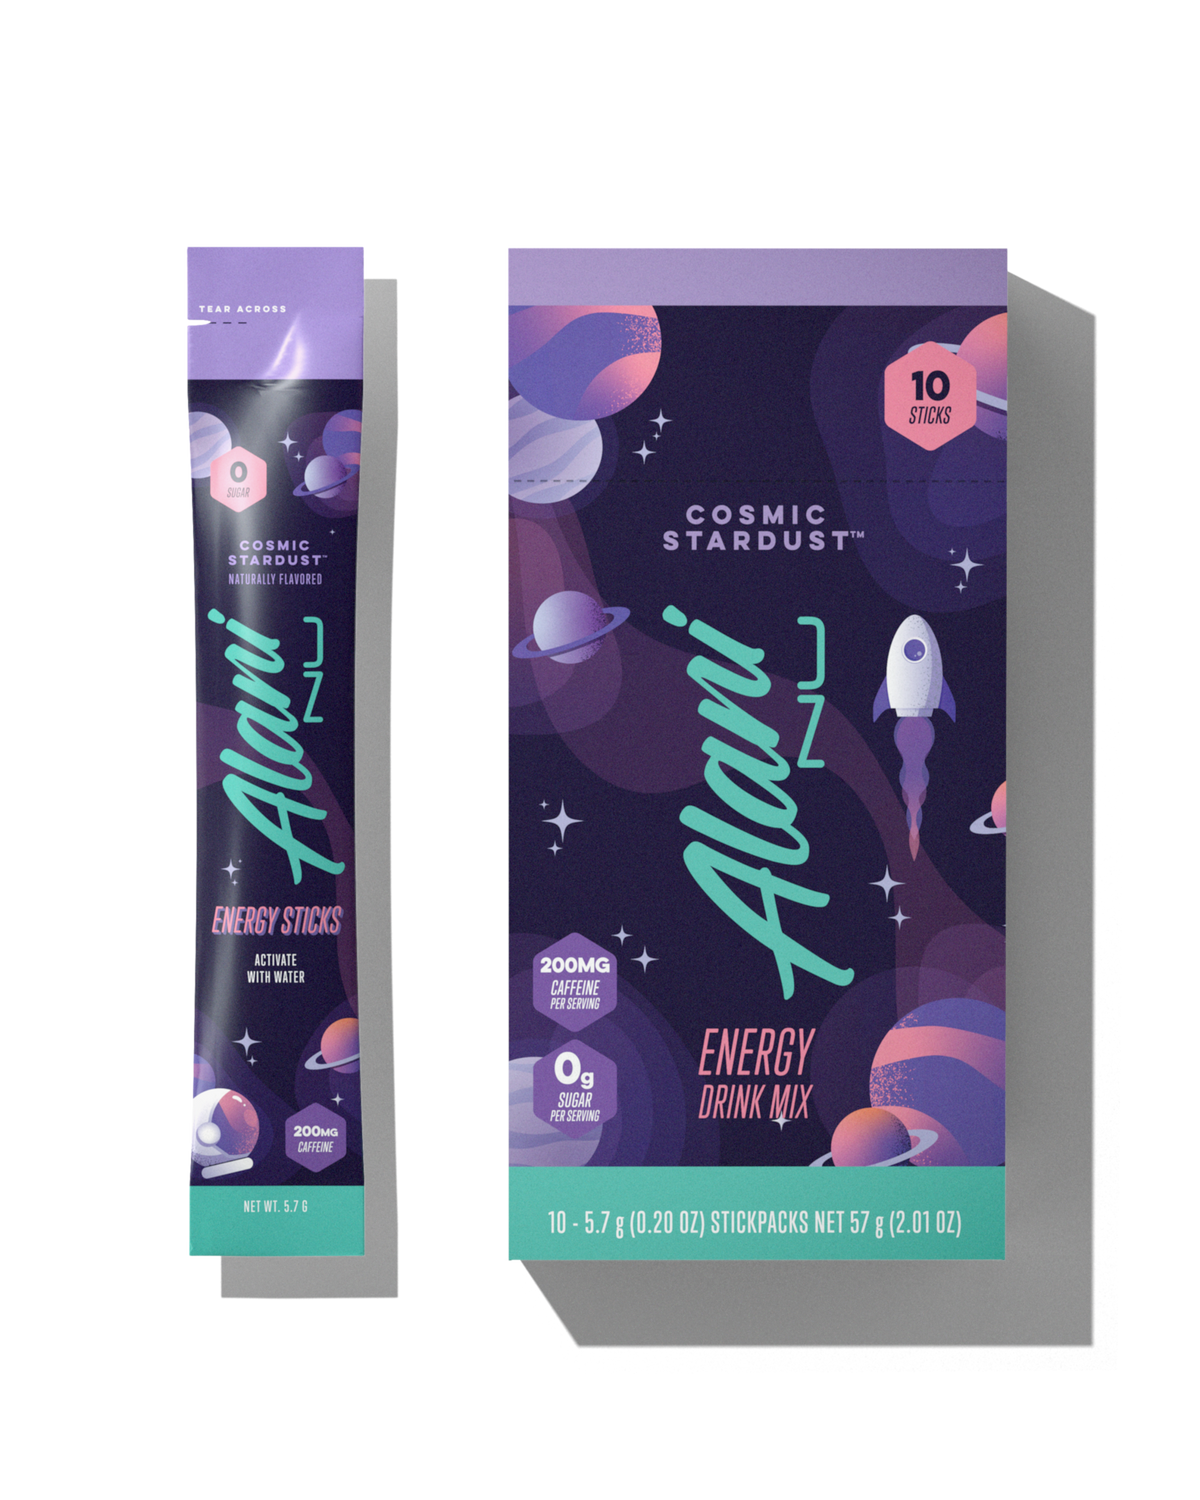 A 10 pack of Energy Sticks in Cosmic Stardust flavor.